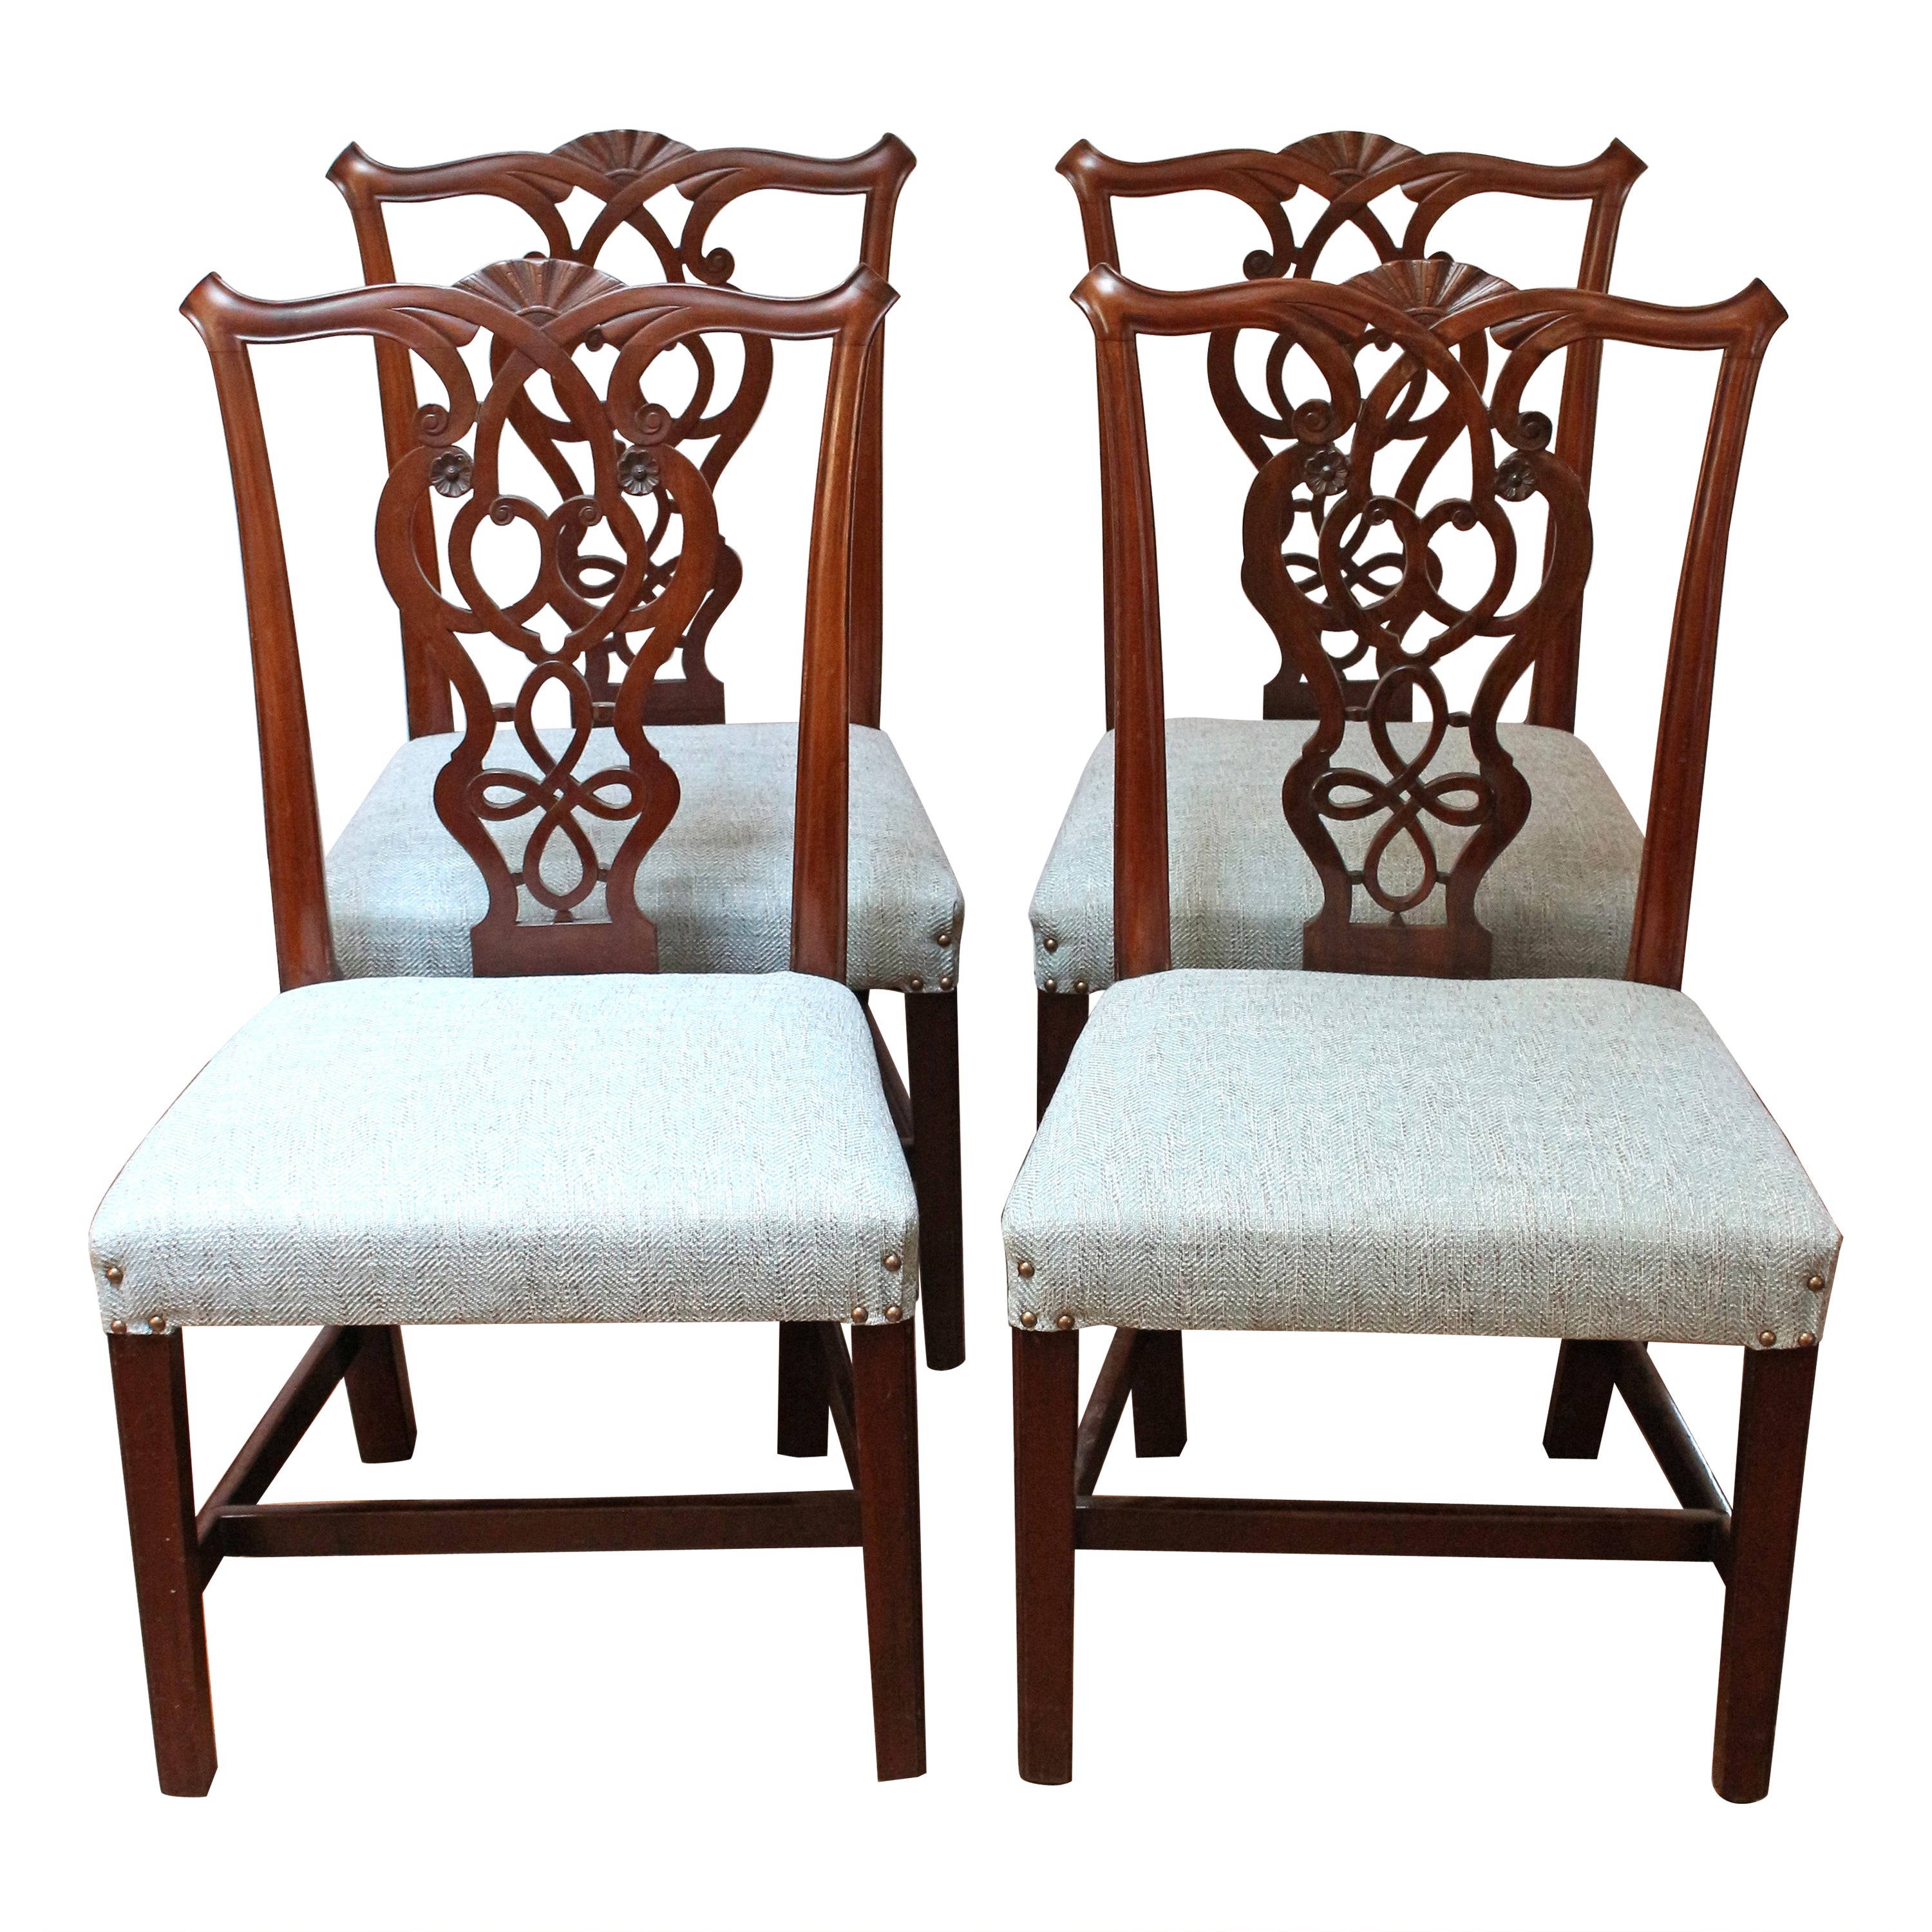 Circa 1765 Set of 4 English George III Period Side Chairs For Sale